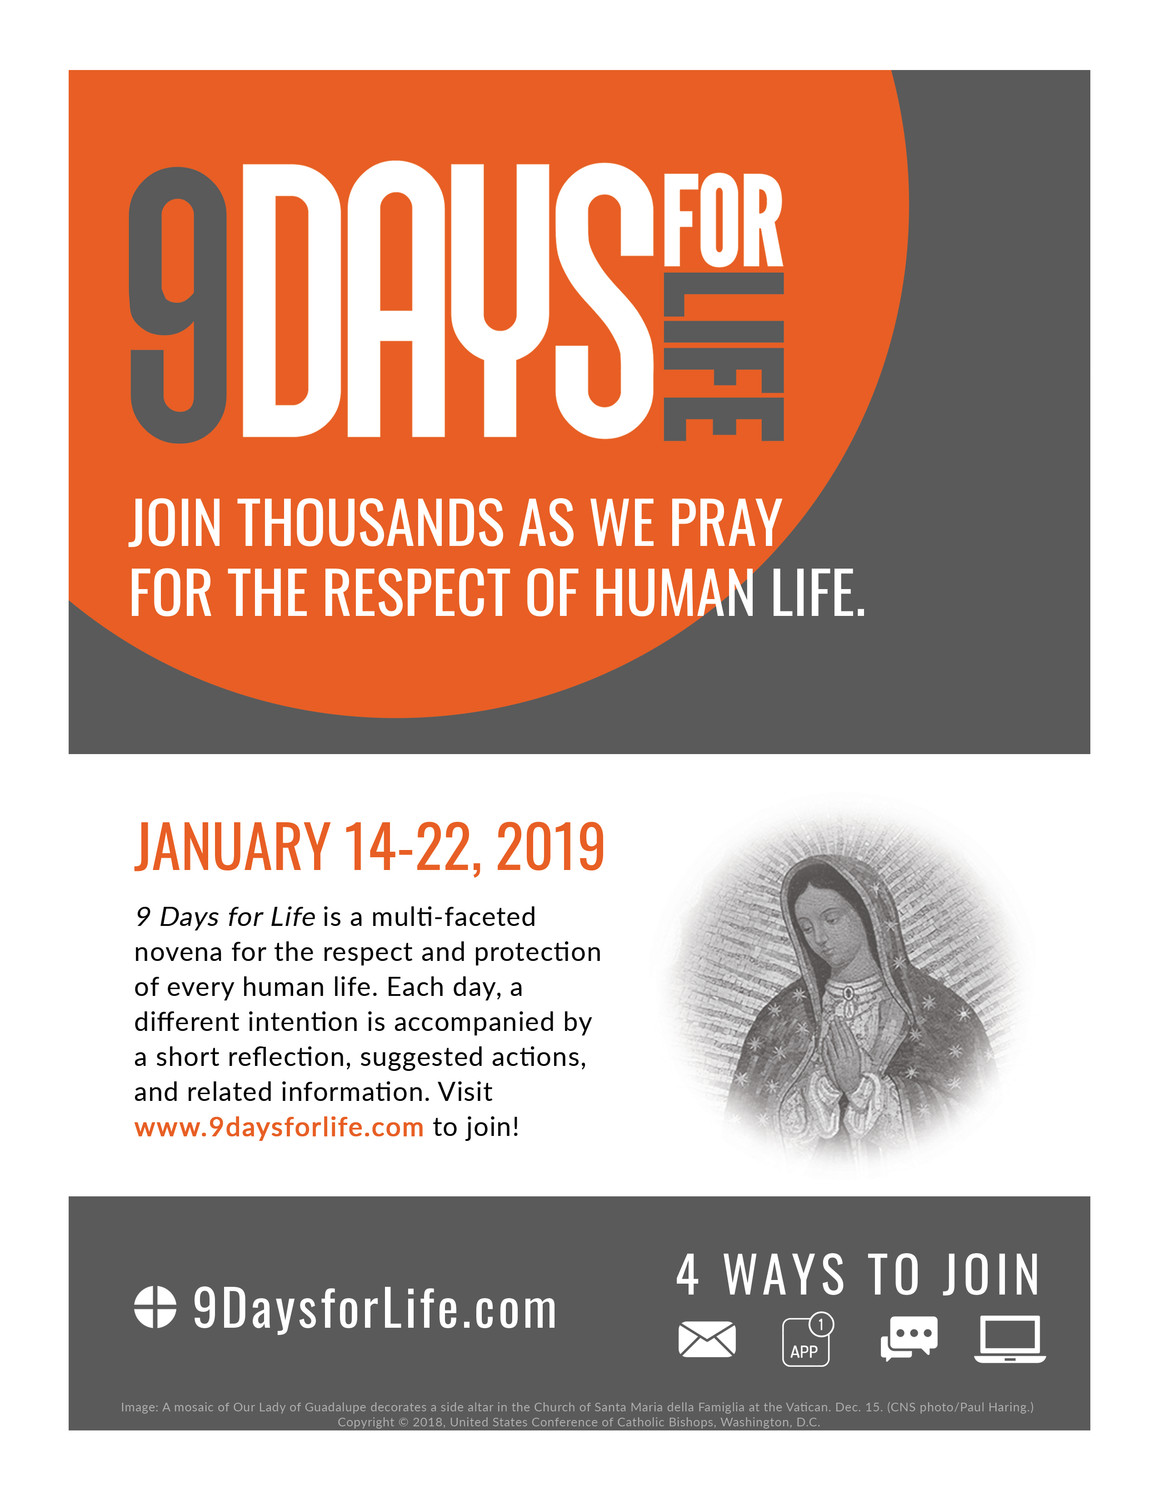 The U.S. Conference of Catholics Bishops announced Dec. 18 the annual “9 Days for Life” prayer and action campaign will run Jan. 14 to Jan. 22. Pictured is promotional material for the campaign.